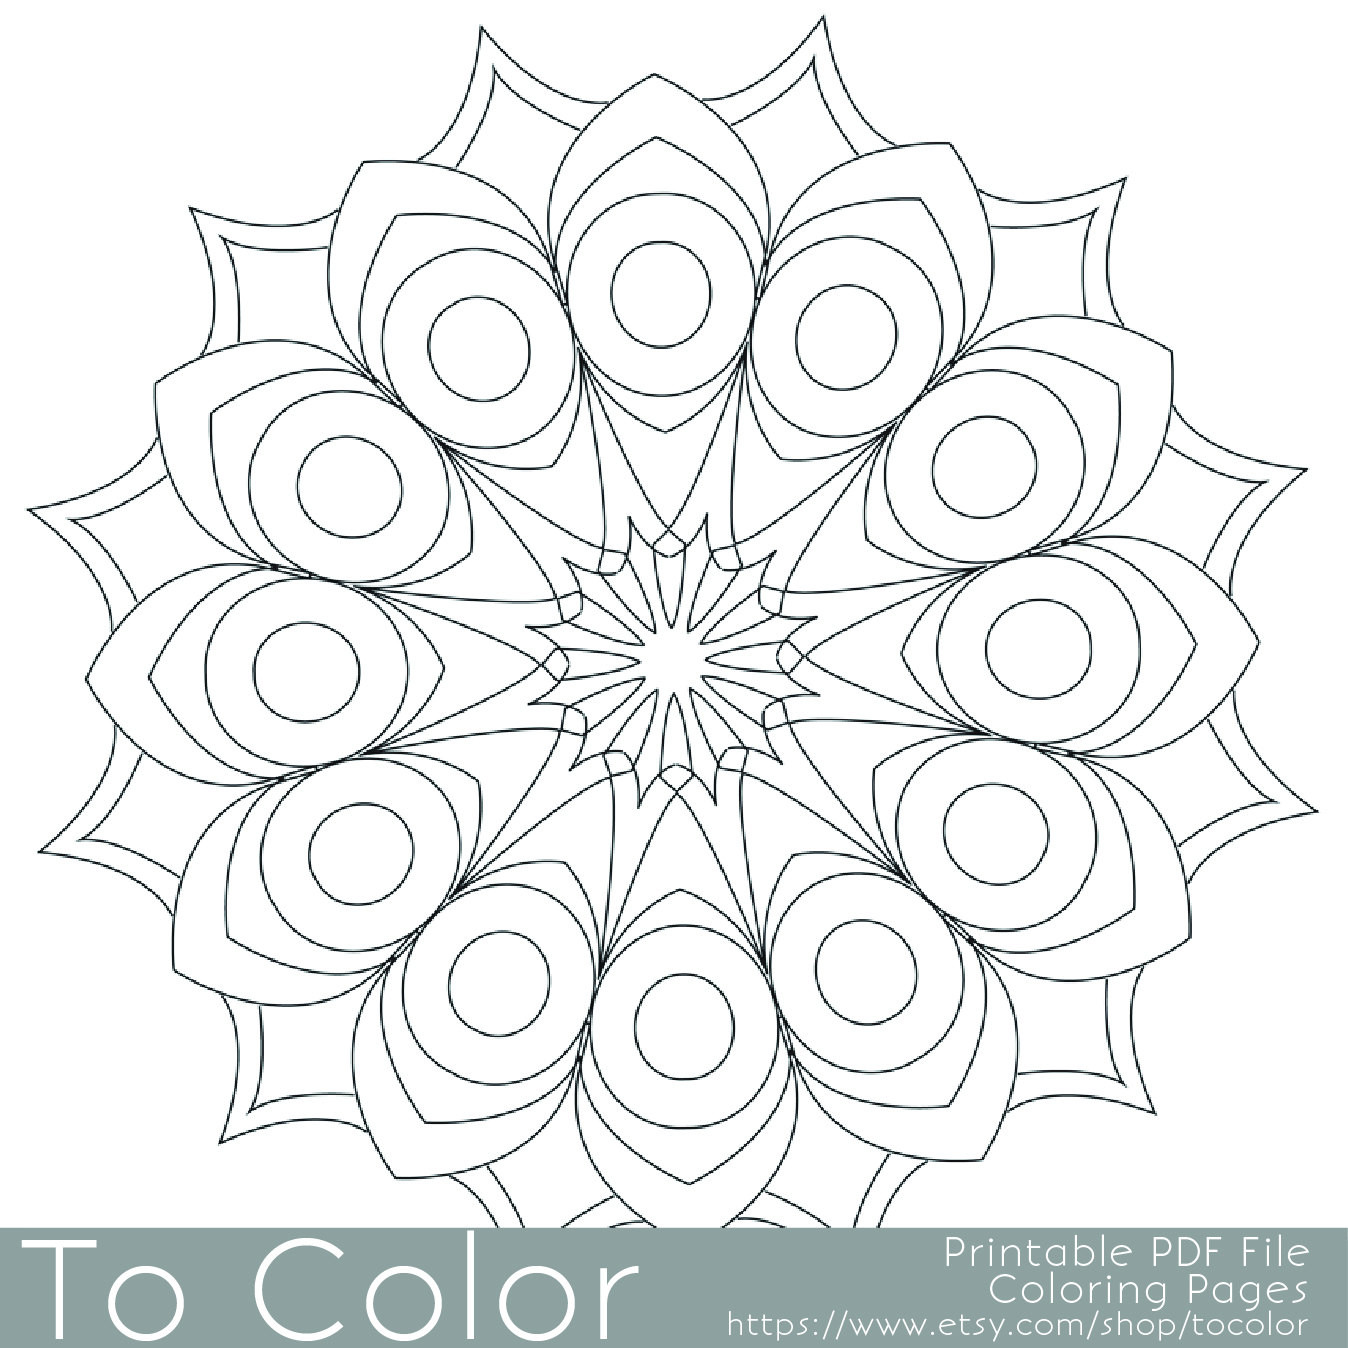 Simple Adult Coloring Books
 Printable Circular Mandala Easy Coloring Pages for Adults Big